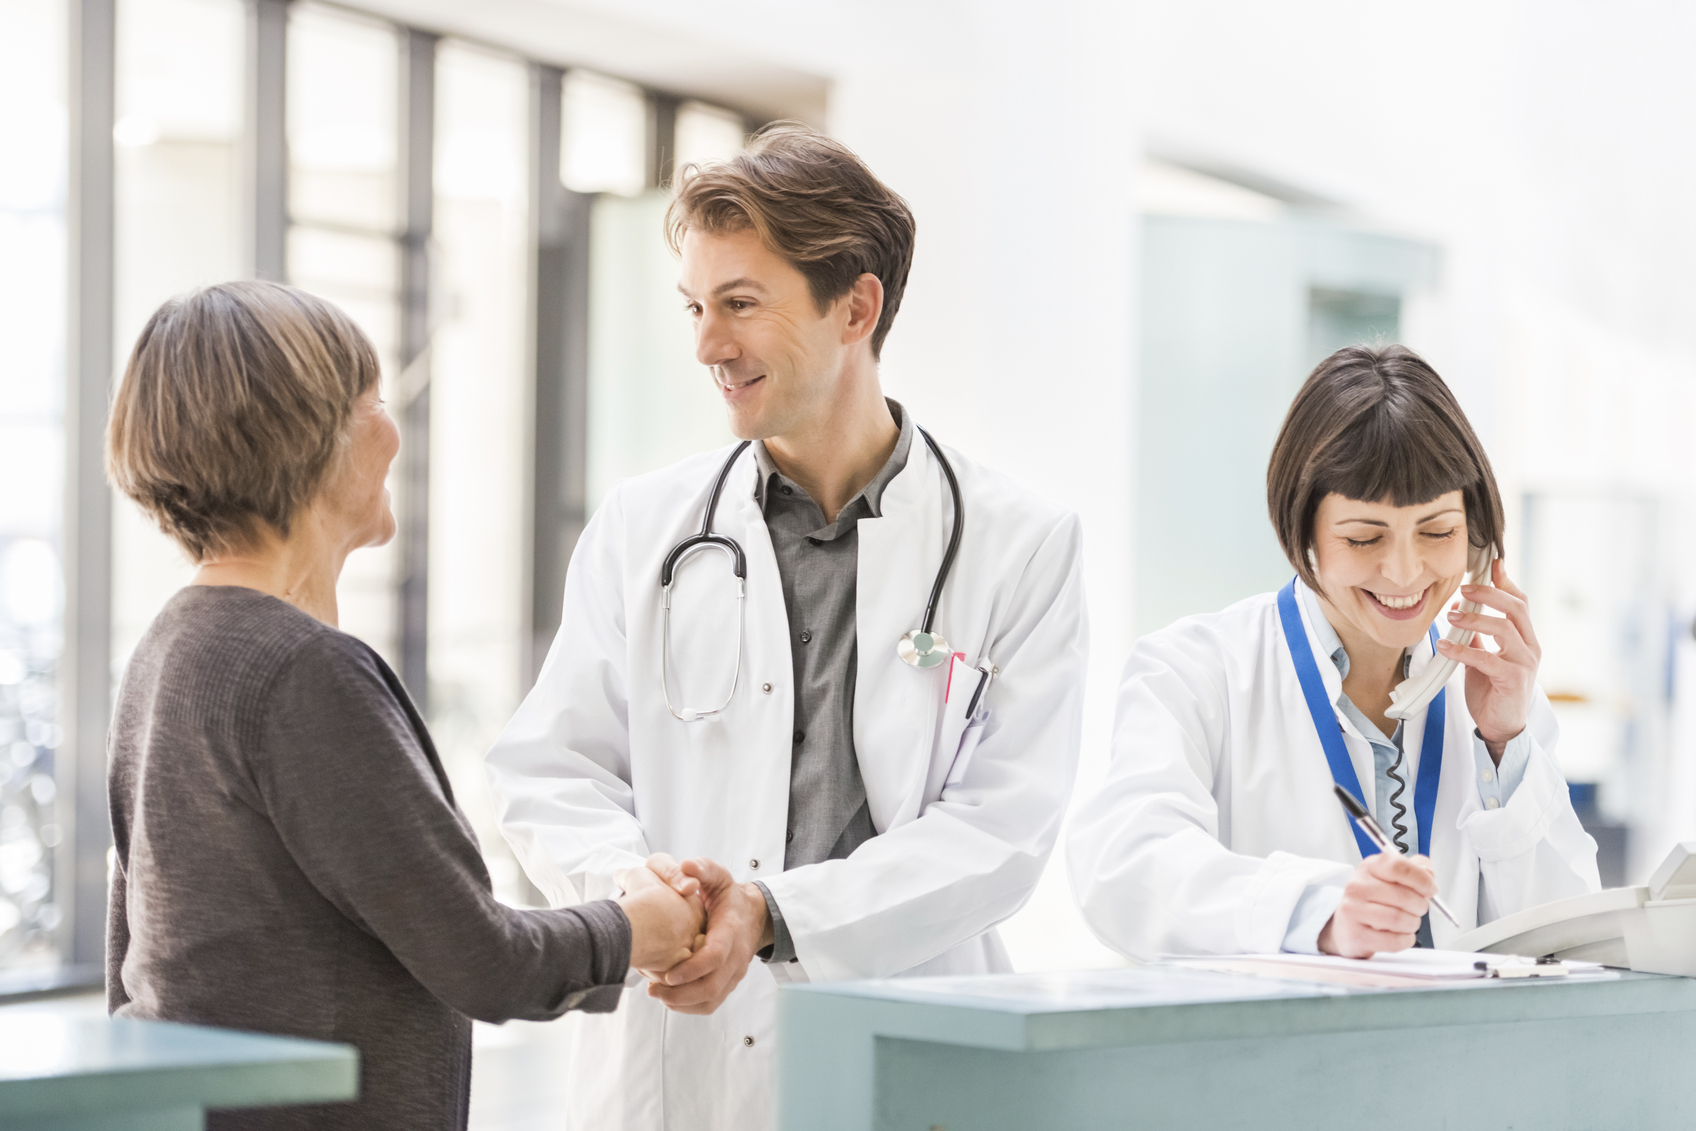 Doctor welcomes a senior patient at reception desk, while a colleague is calling on the phone.